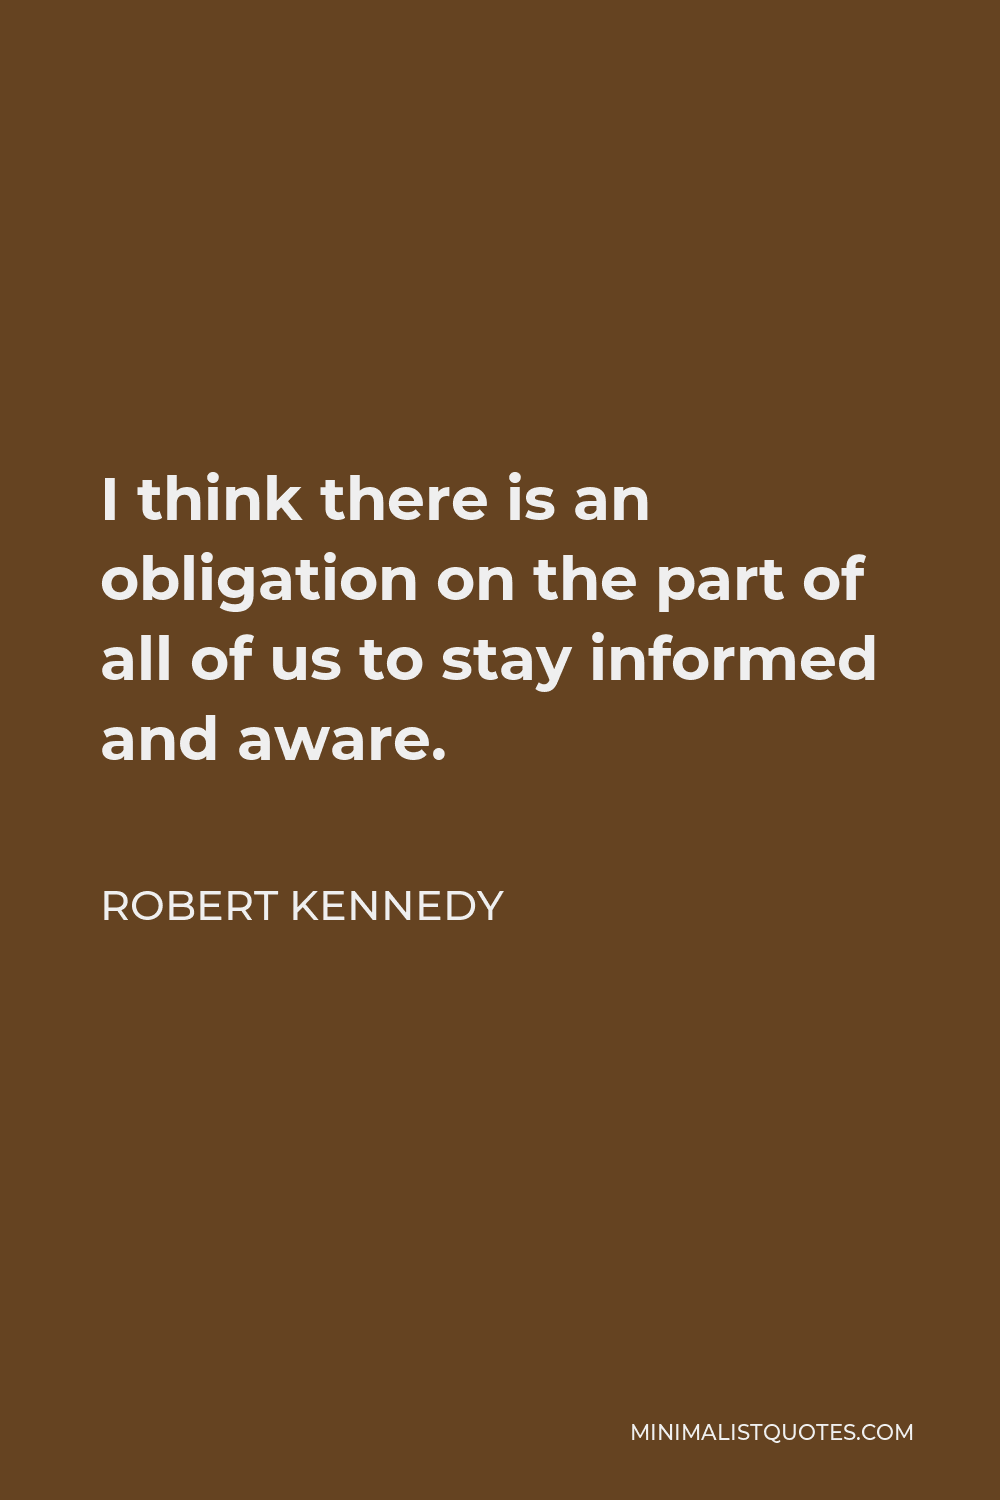 Robert Kennedy Quote - I think there is an obligation on the part of all of us to stay informed and aware.